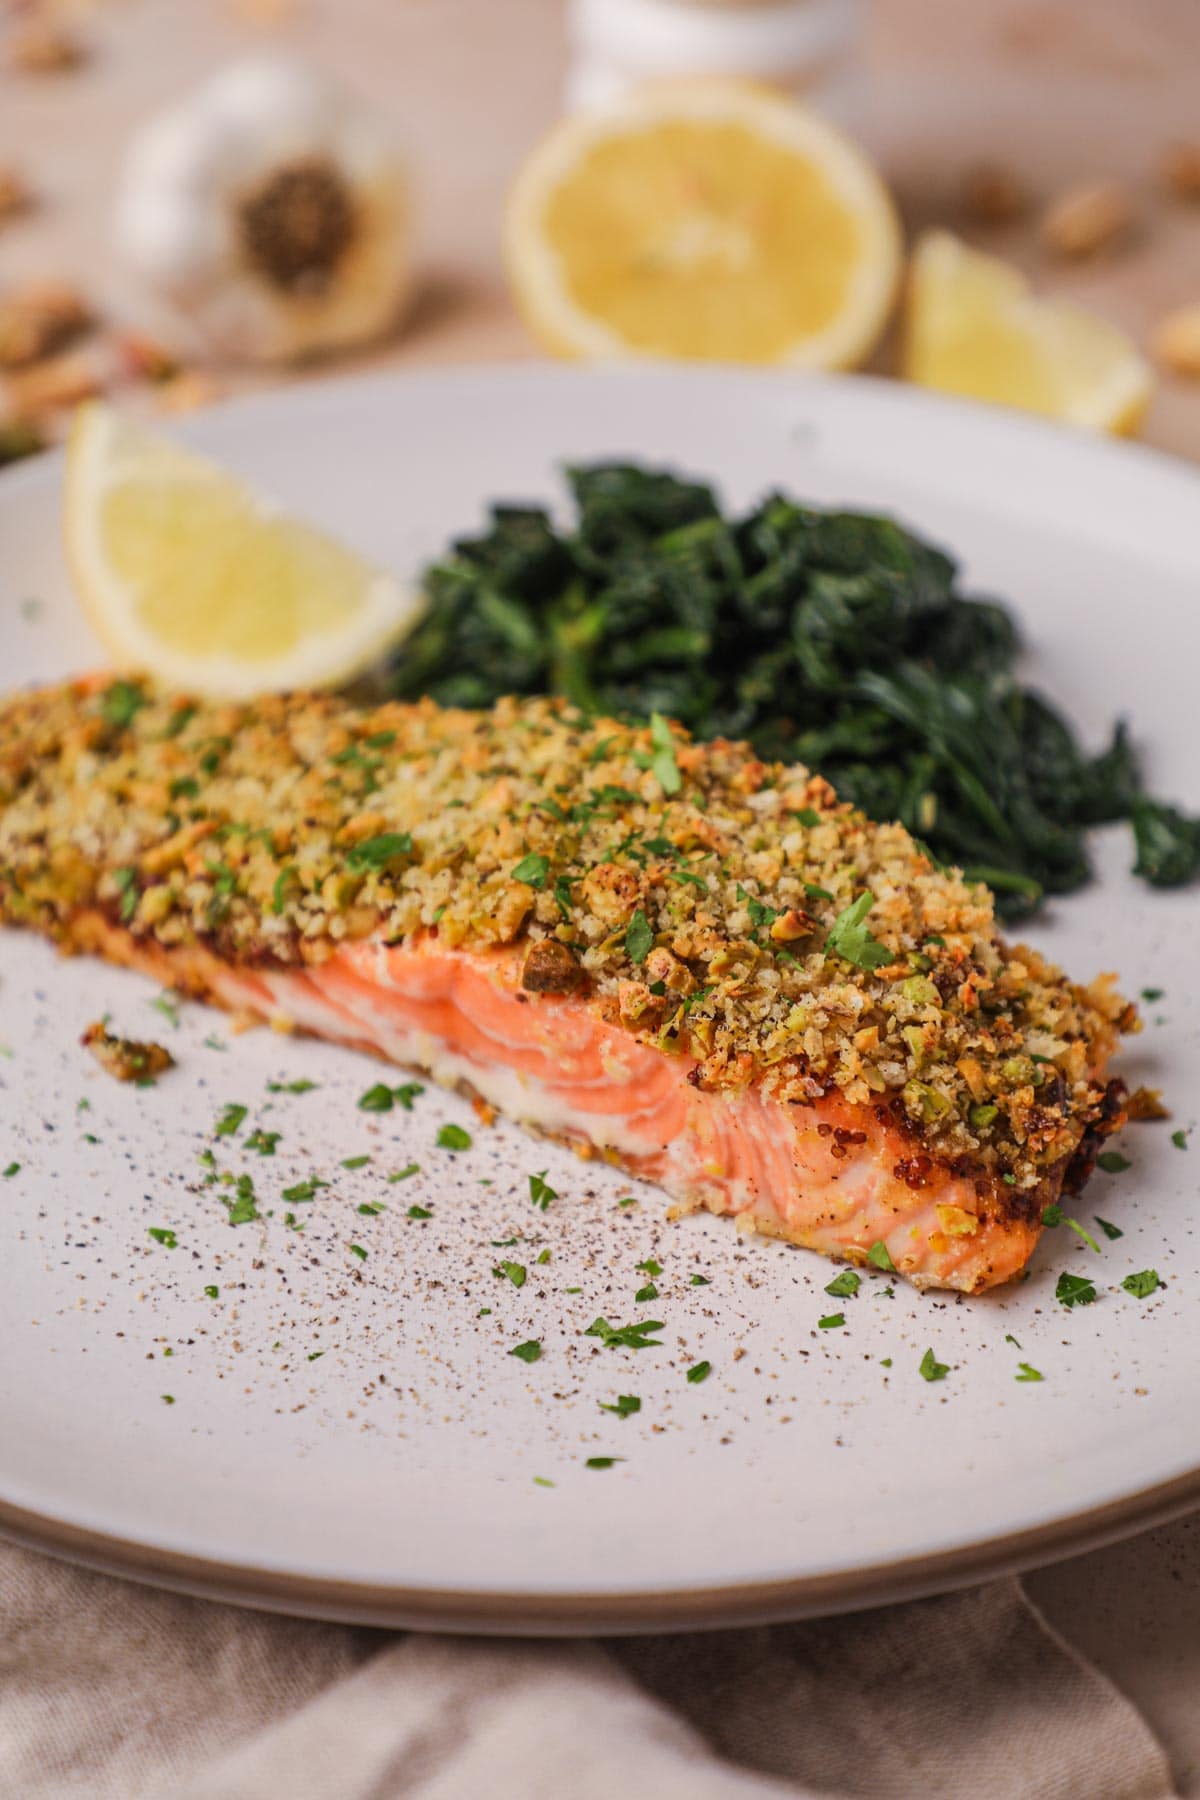 Panko and pistachio-crusted salmon filet with dijonnaise, served with sautéed spinach and lemon wedges.